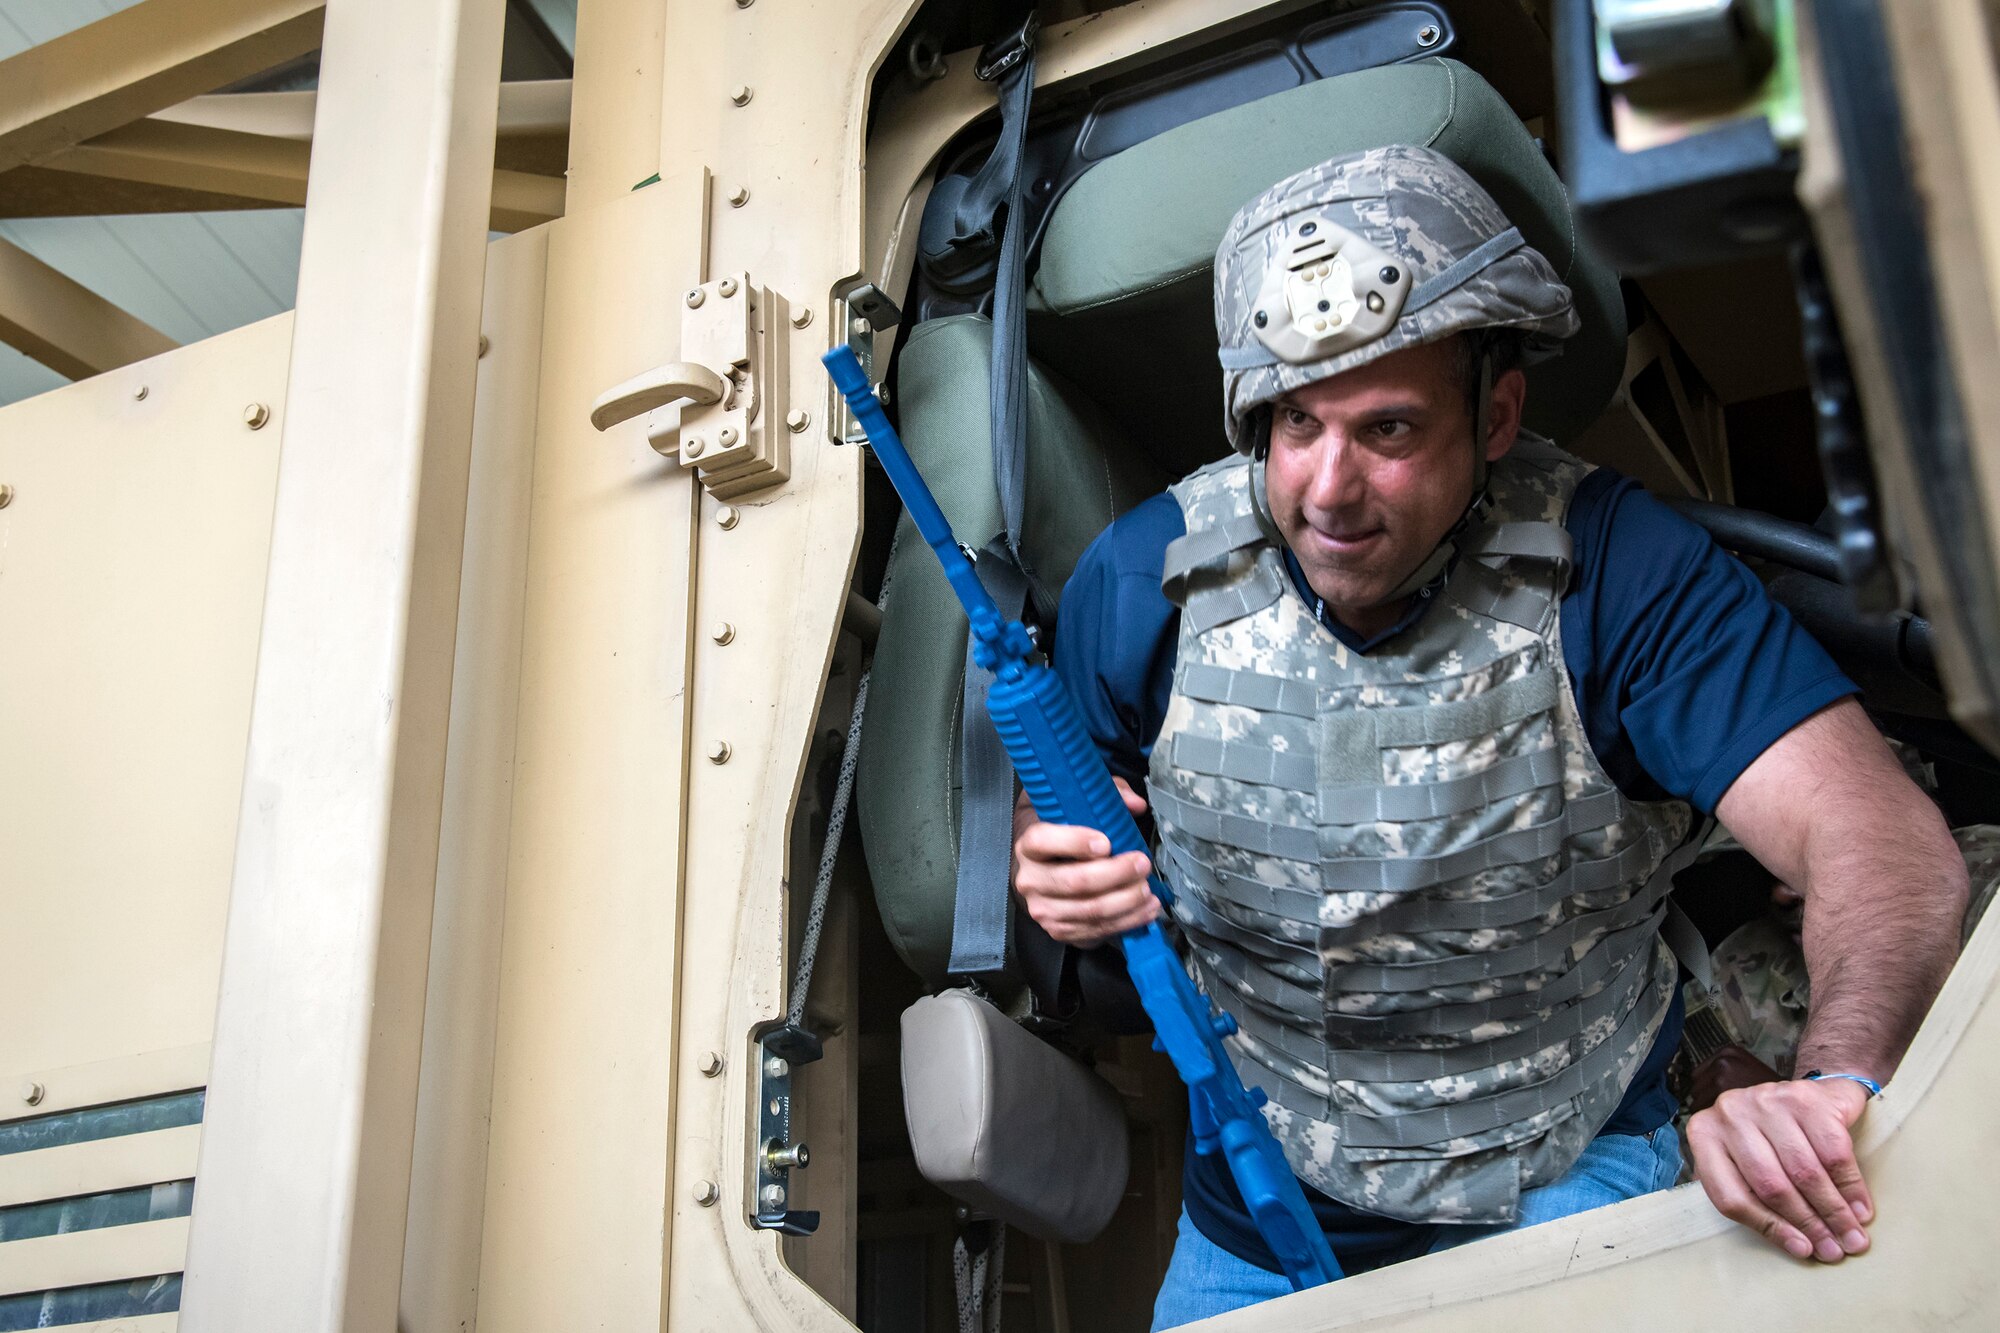 Michael Cherenson, Joint Civil Orientation Course (JCOC) 88 member, climbs out of a mine-resistant, ambush-protected vehicle roll-over simulator, June 13, 2018, at Moody Air Force Base, Ga. The mission of JCOC is to increase the public’s understanding of the military through engagements between the armed forces and course members. (U.S. Air Force photo by Airman 1st Class Eugene Oliver)